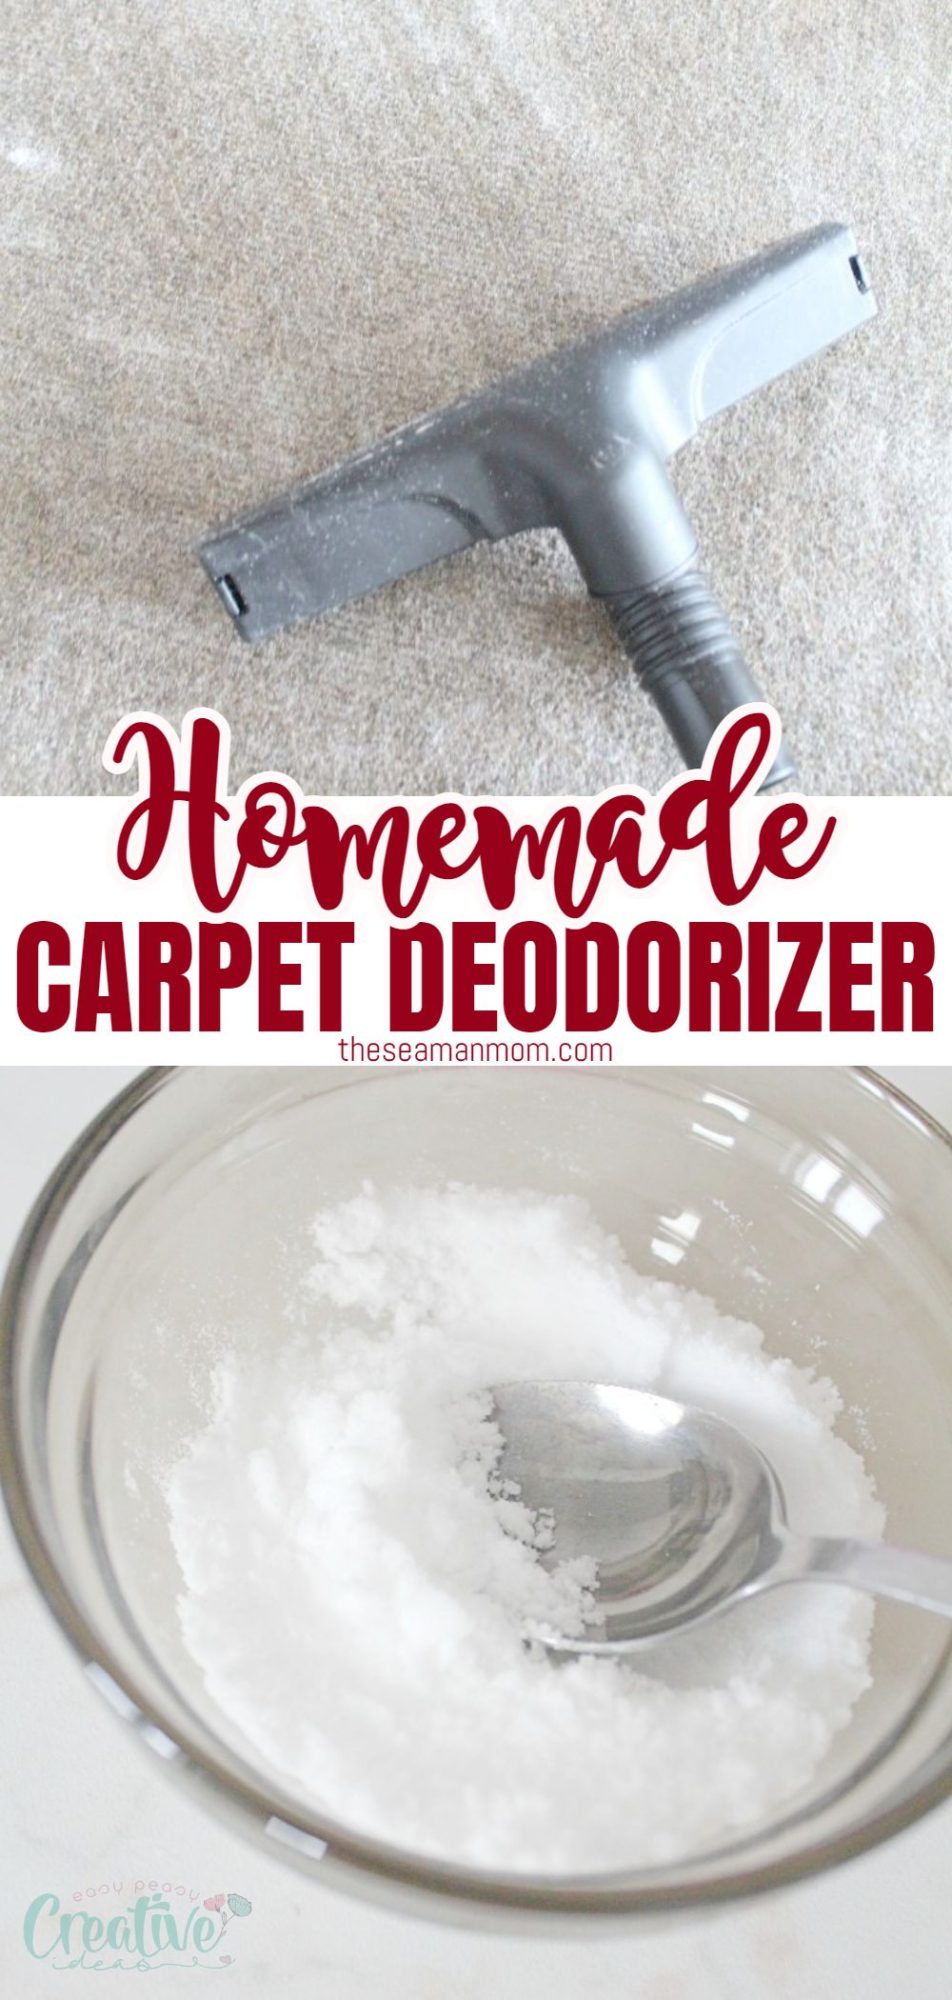 photo collage of DIY carpet deodorizer in a bowl and sprinkled on a carpet